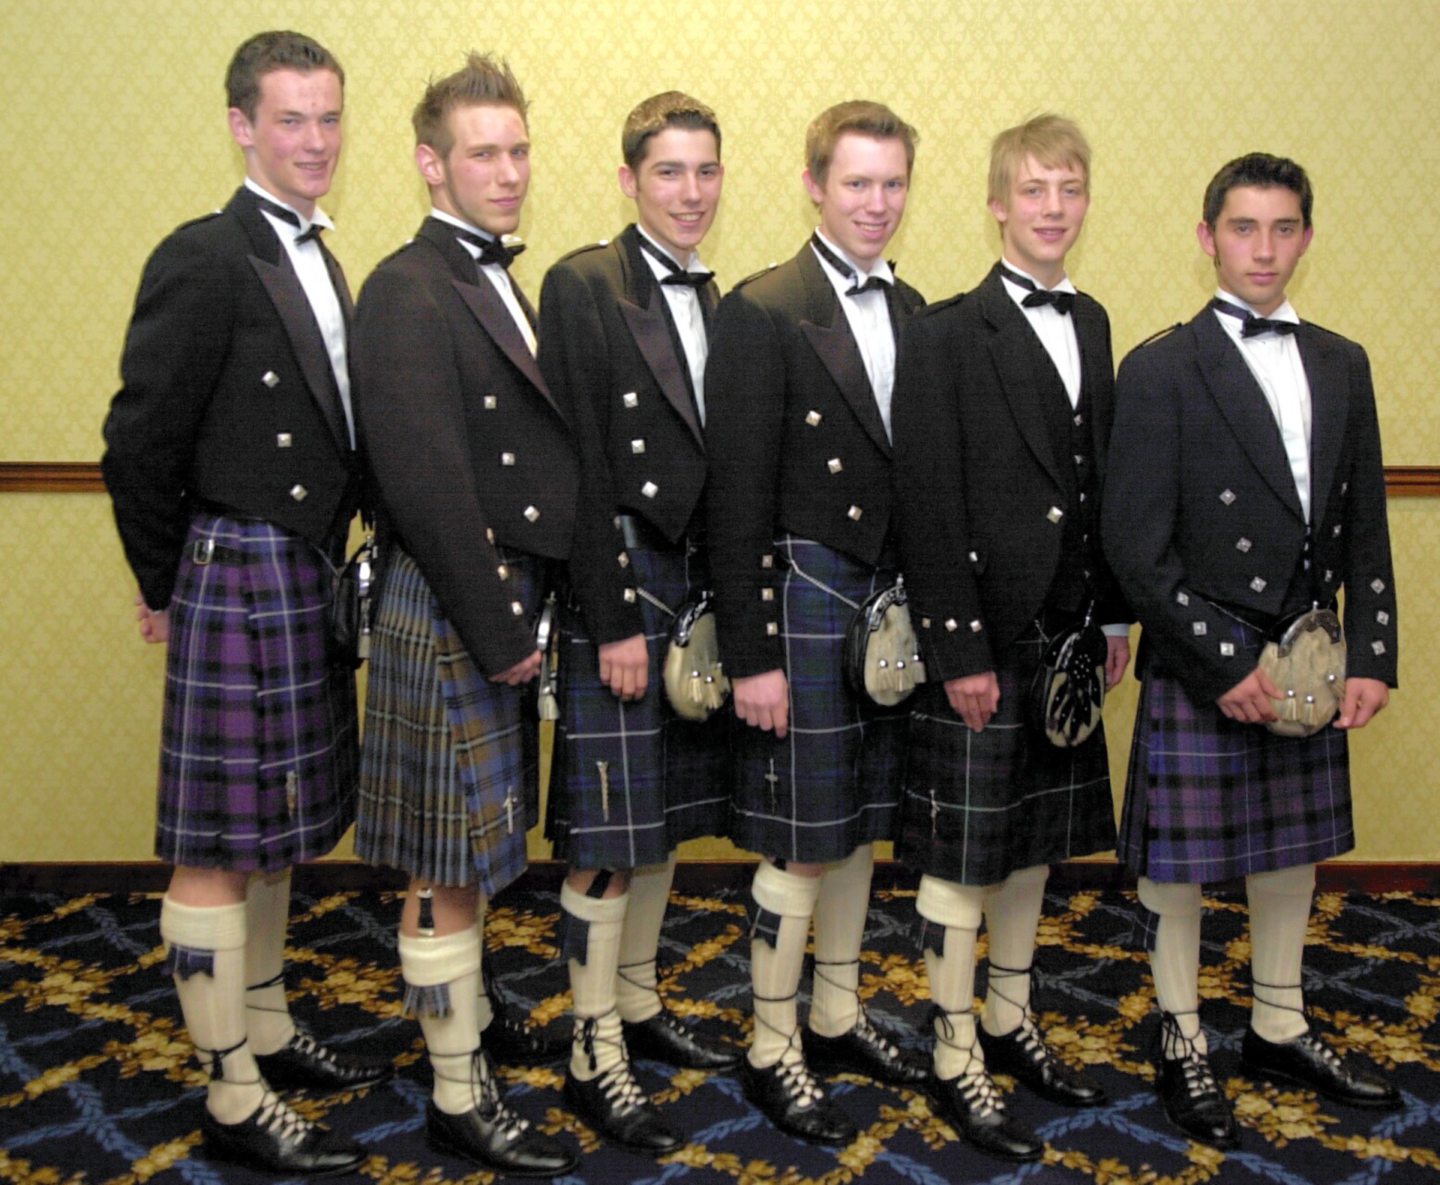 Boys at the the Grammar School prom in 2005.